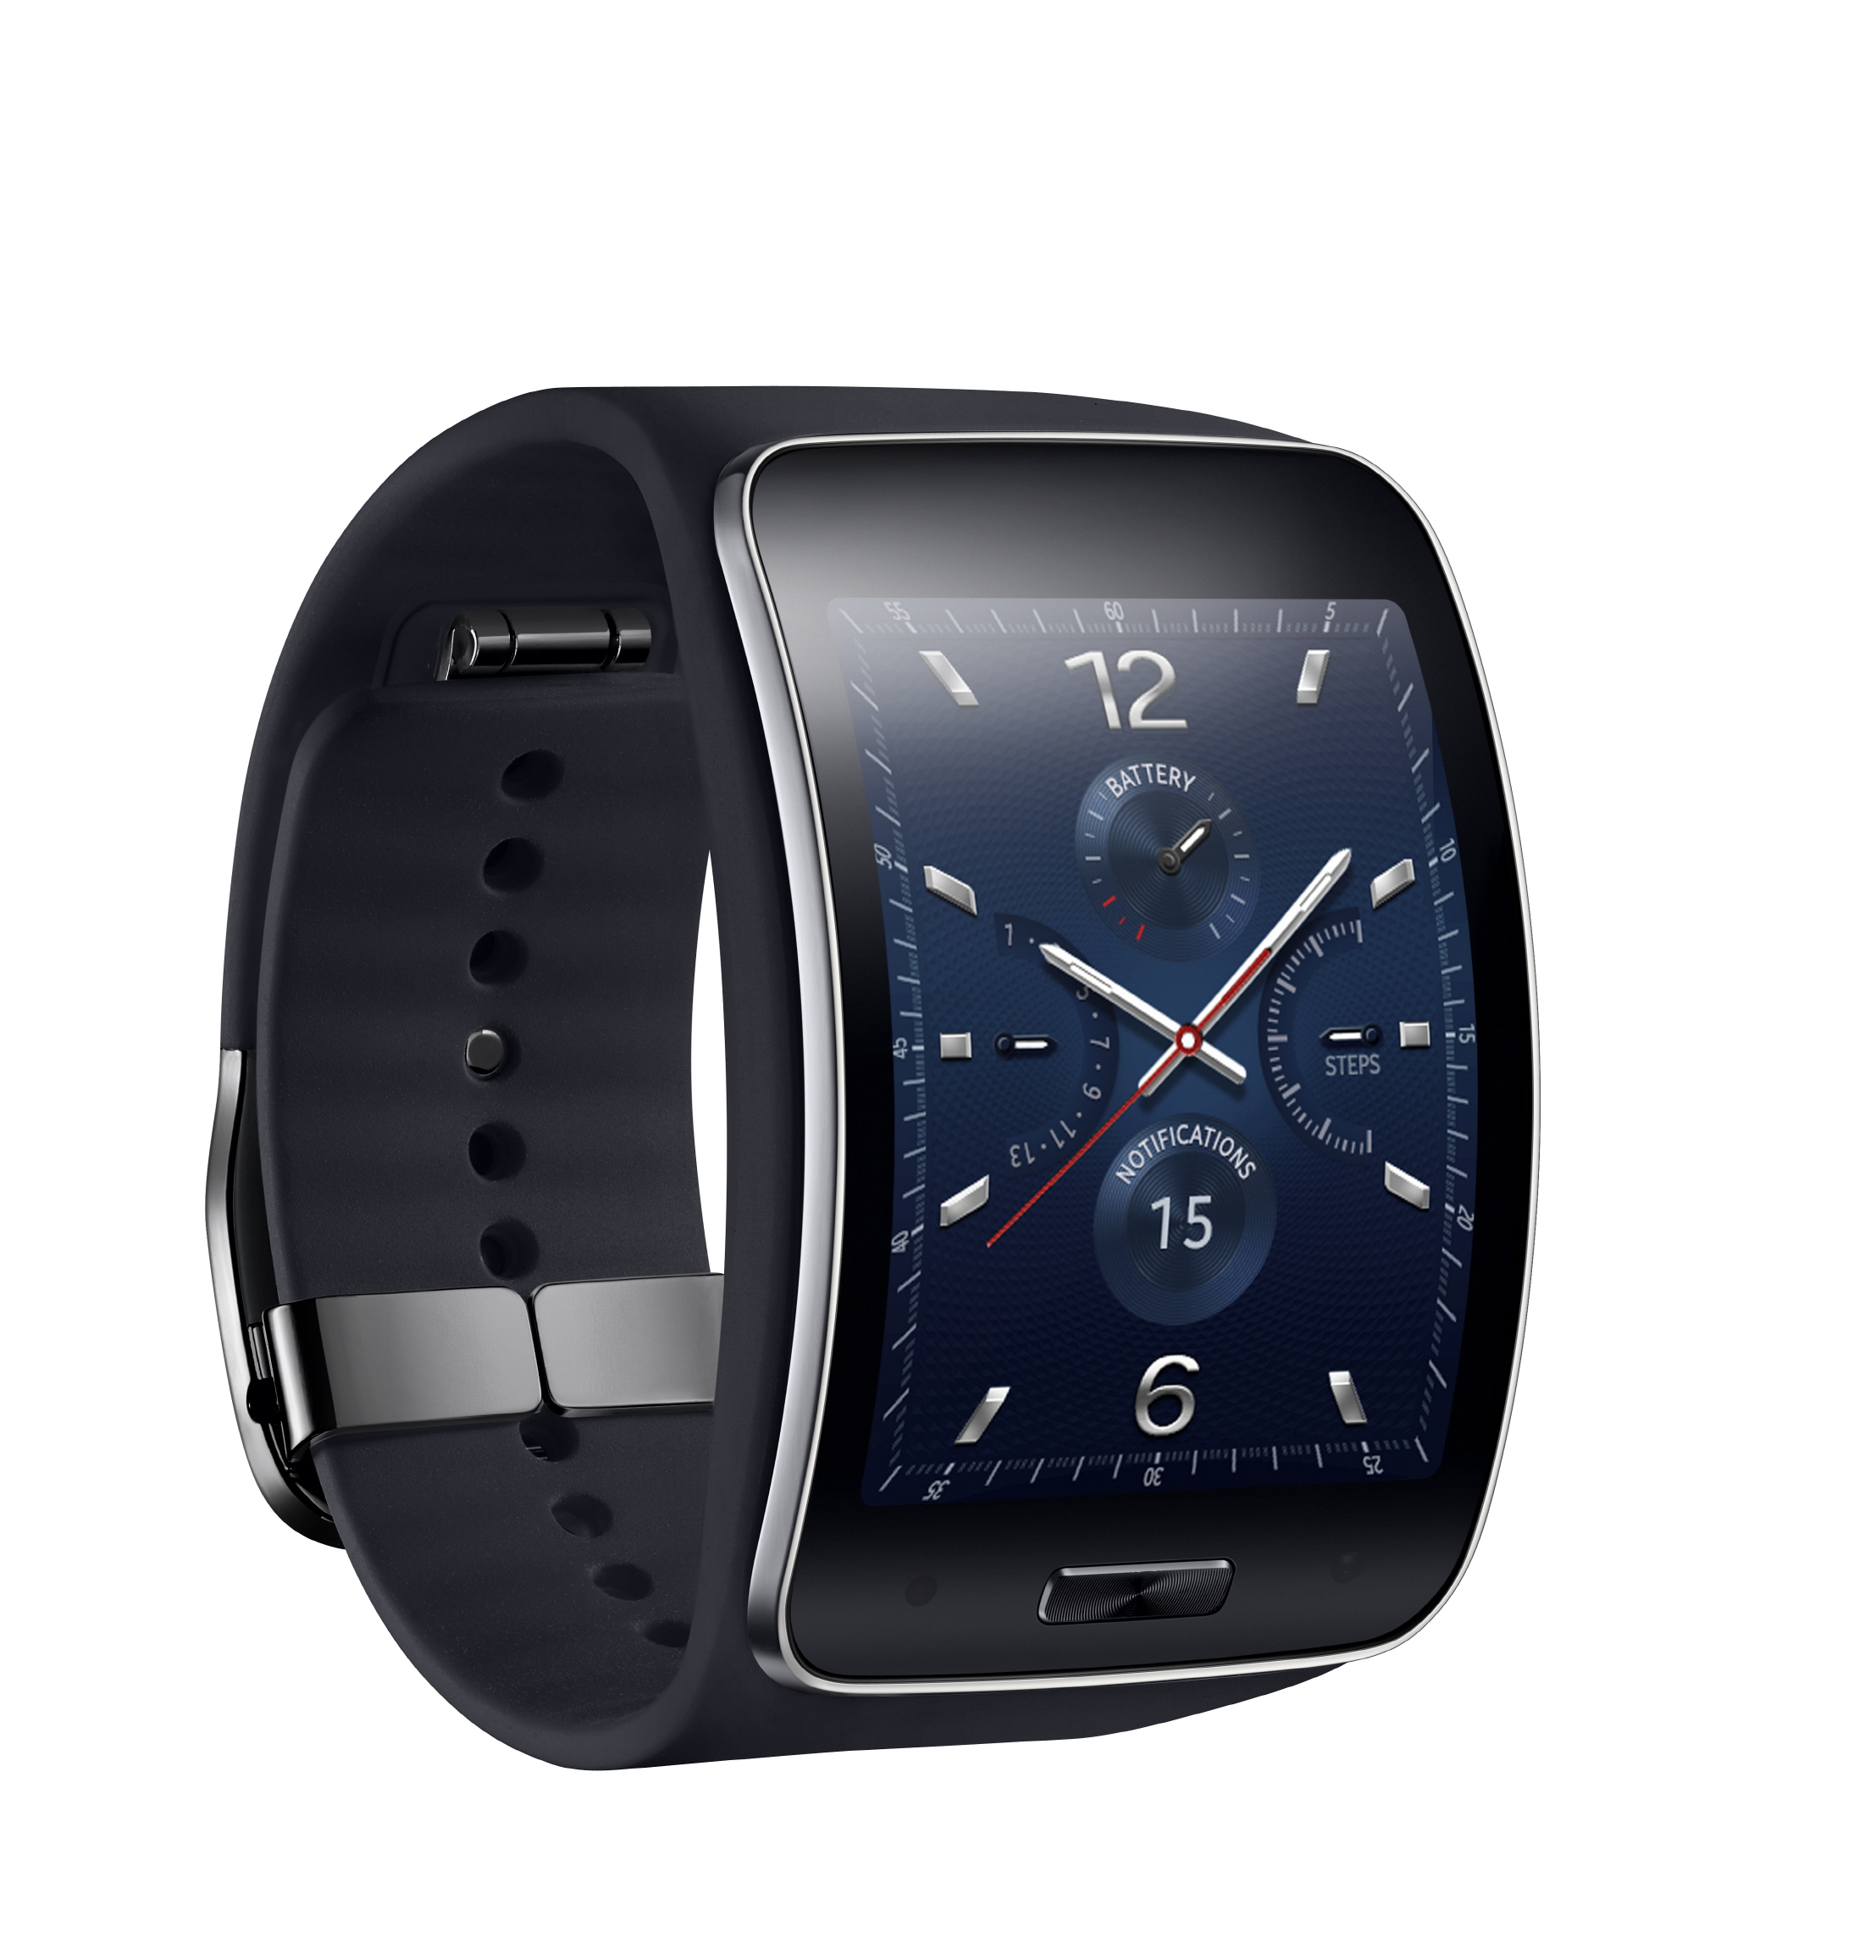 Samsung Pushes Further into Wearables with Gear S and Circle